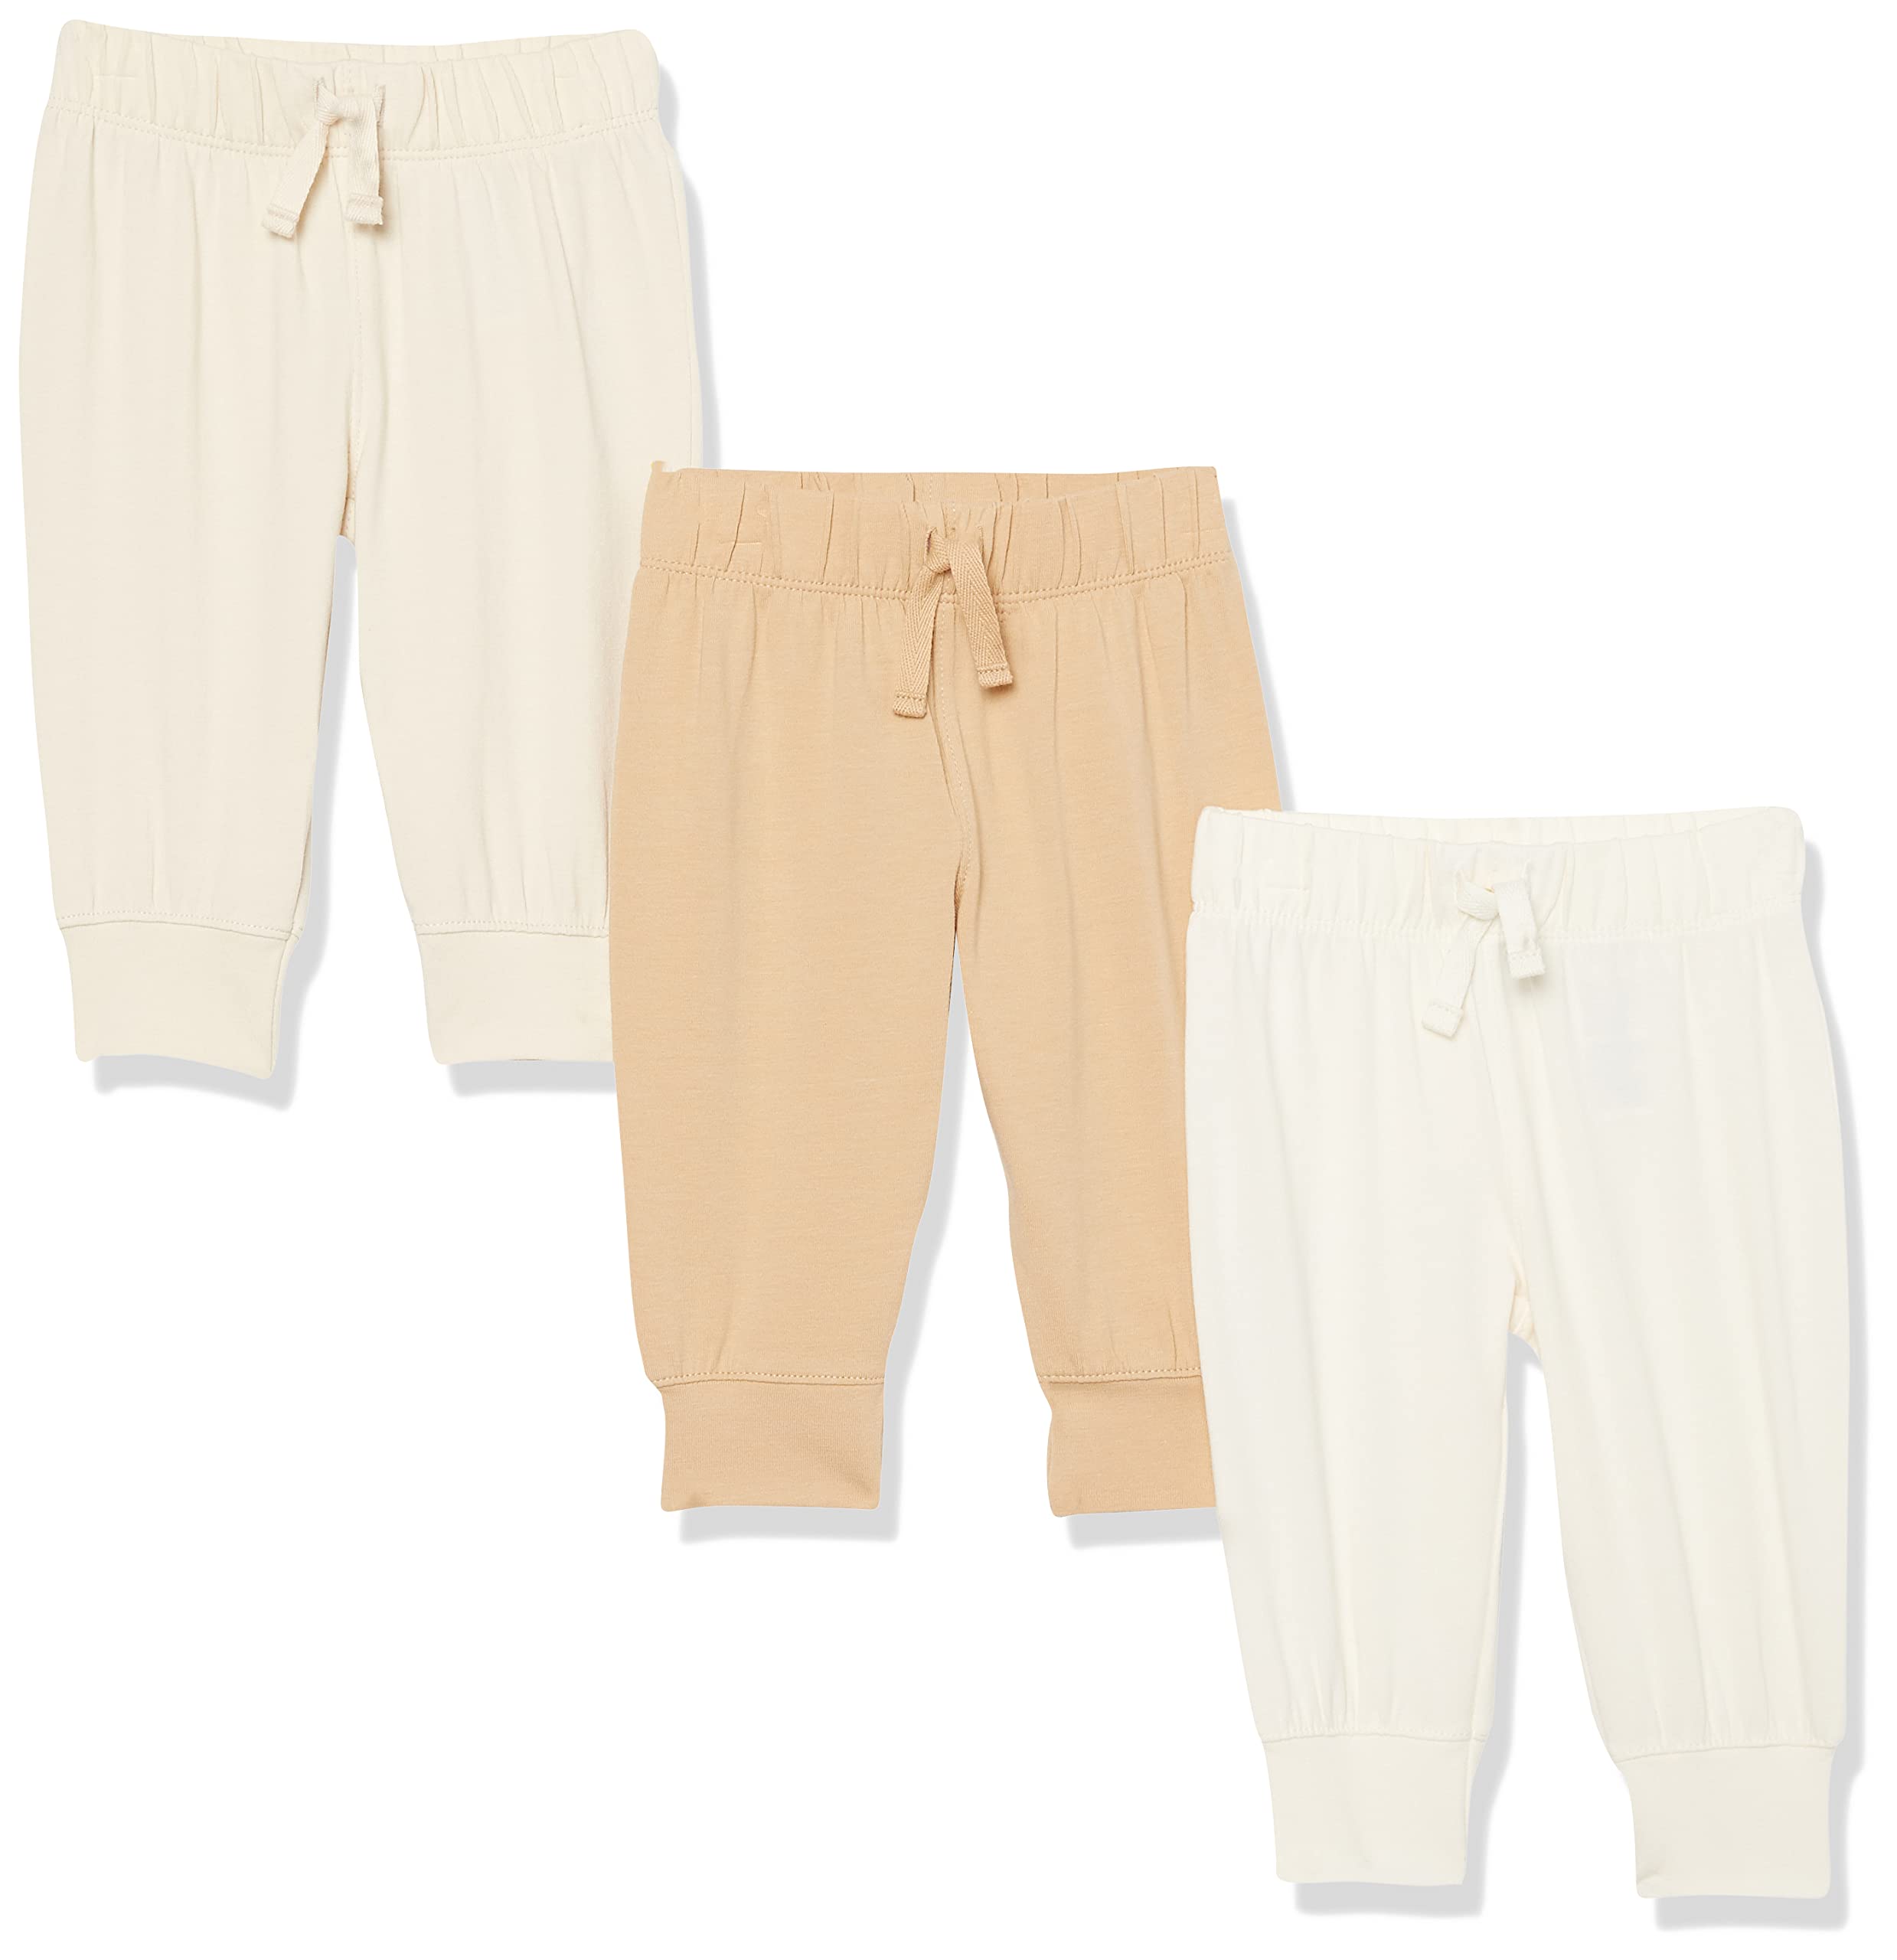 Amazon Essentials Unisex Babies' Cotton Stretch Jersey Jogger (Previously Amazon Aware), Pack of 3, Beige, Preemie